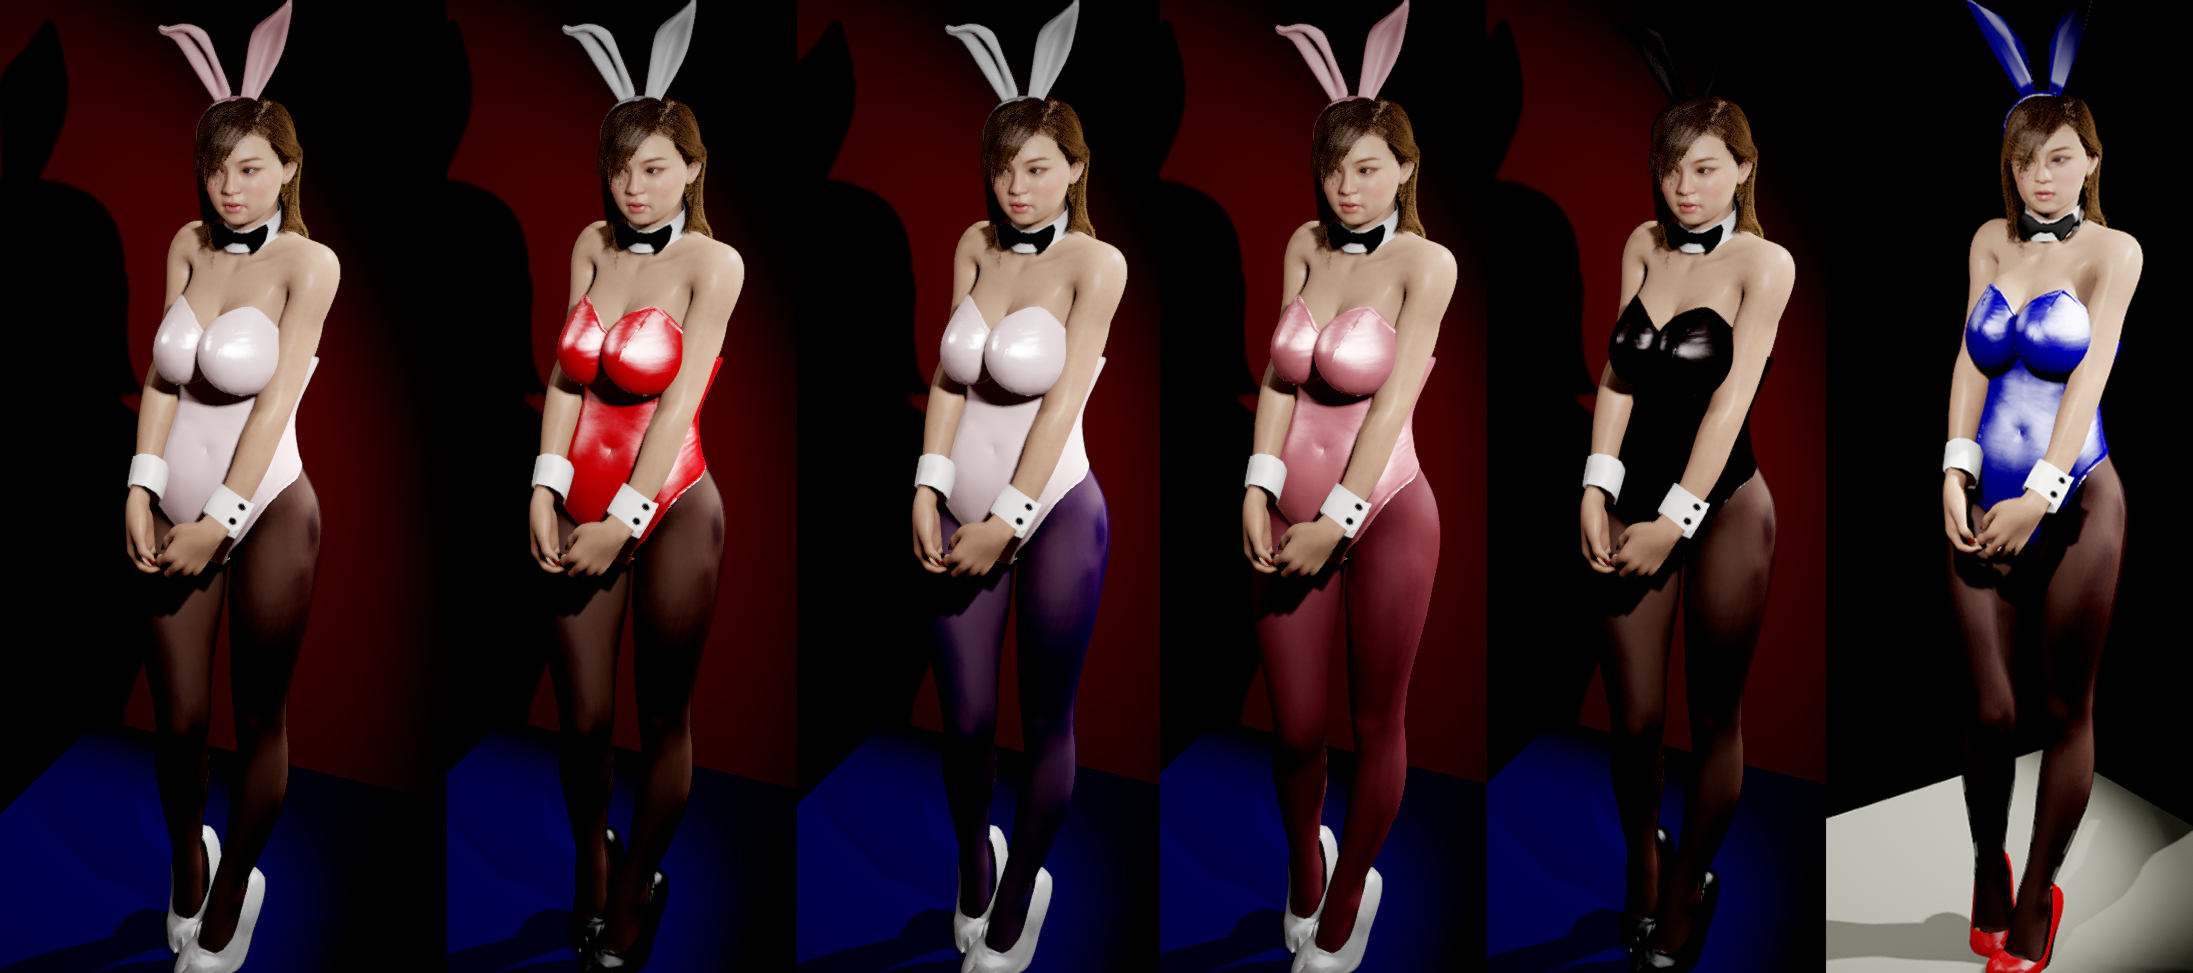 BUNNY_PROFILES.png